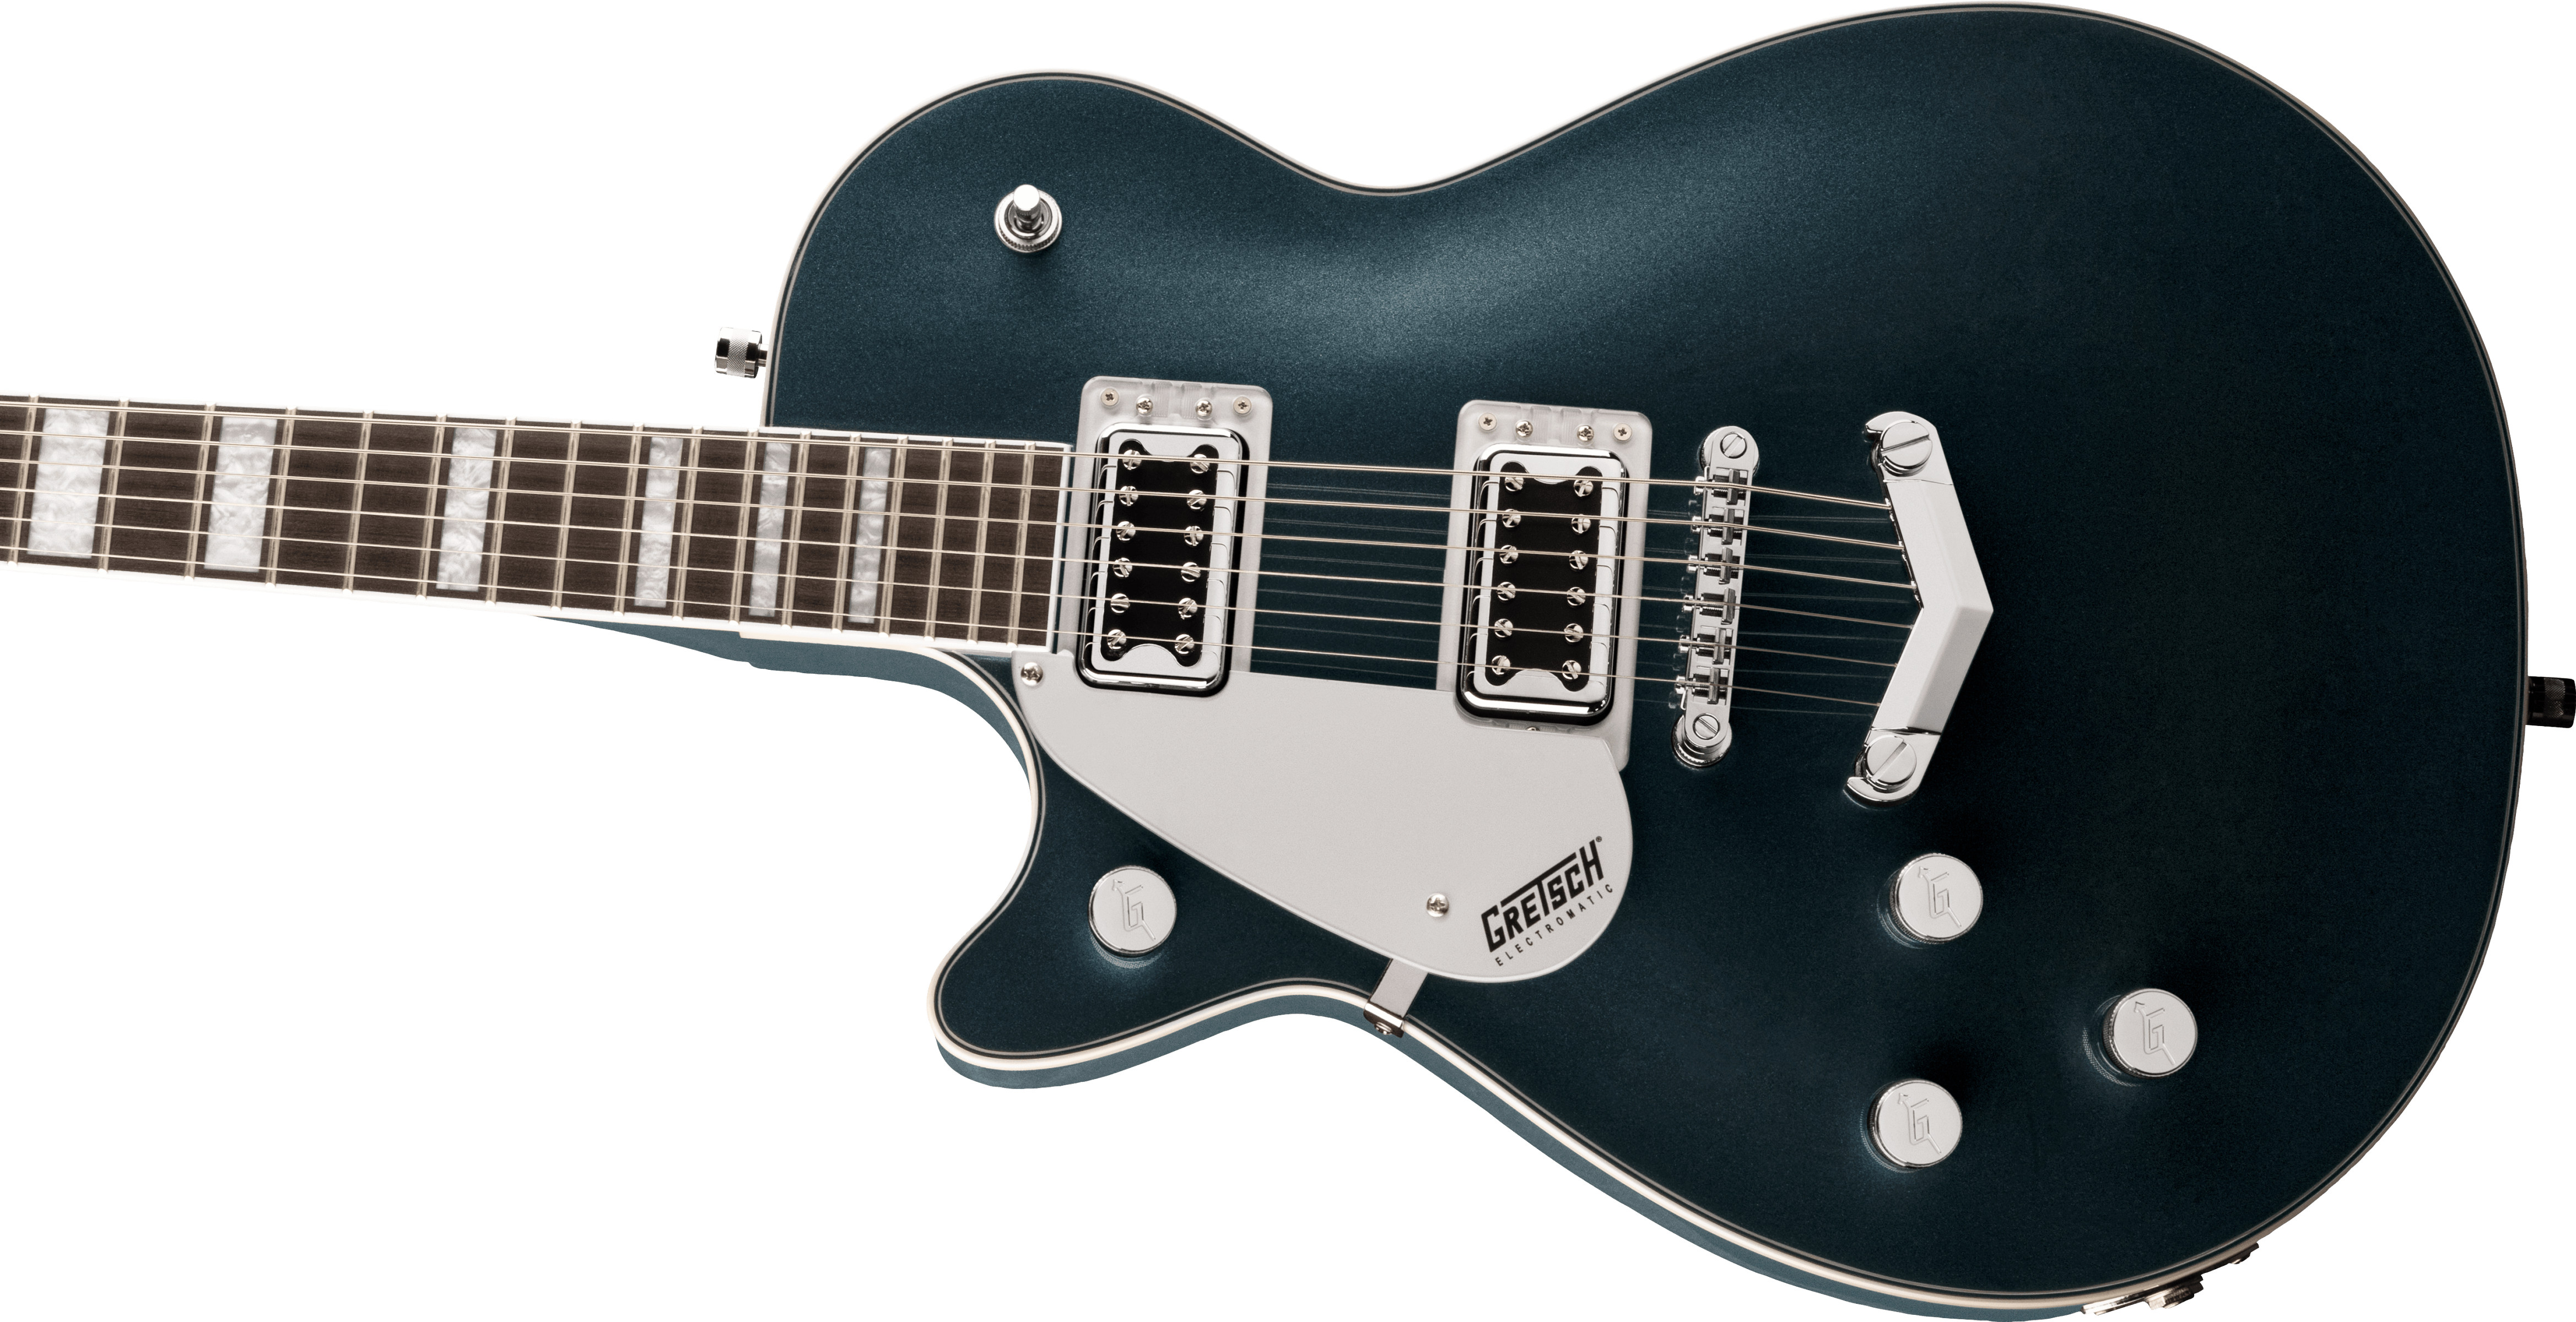 GRETSCH G5220LH Electromatic Jet BT Single-Cut with V-Stoptail Left Handed Jade Grey Metallic 2517120519